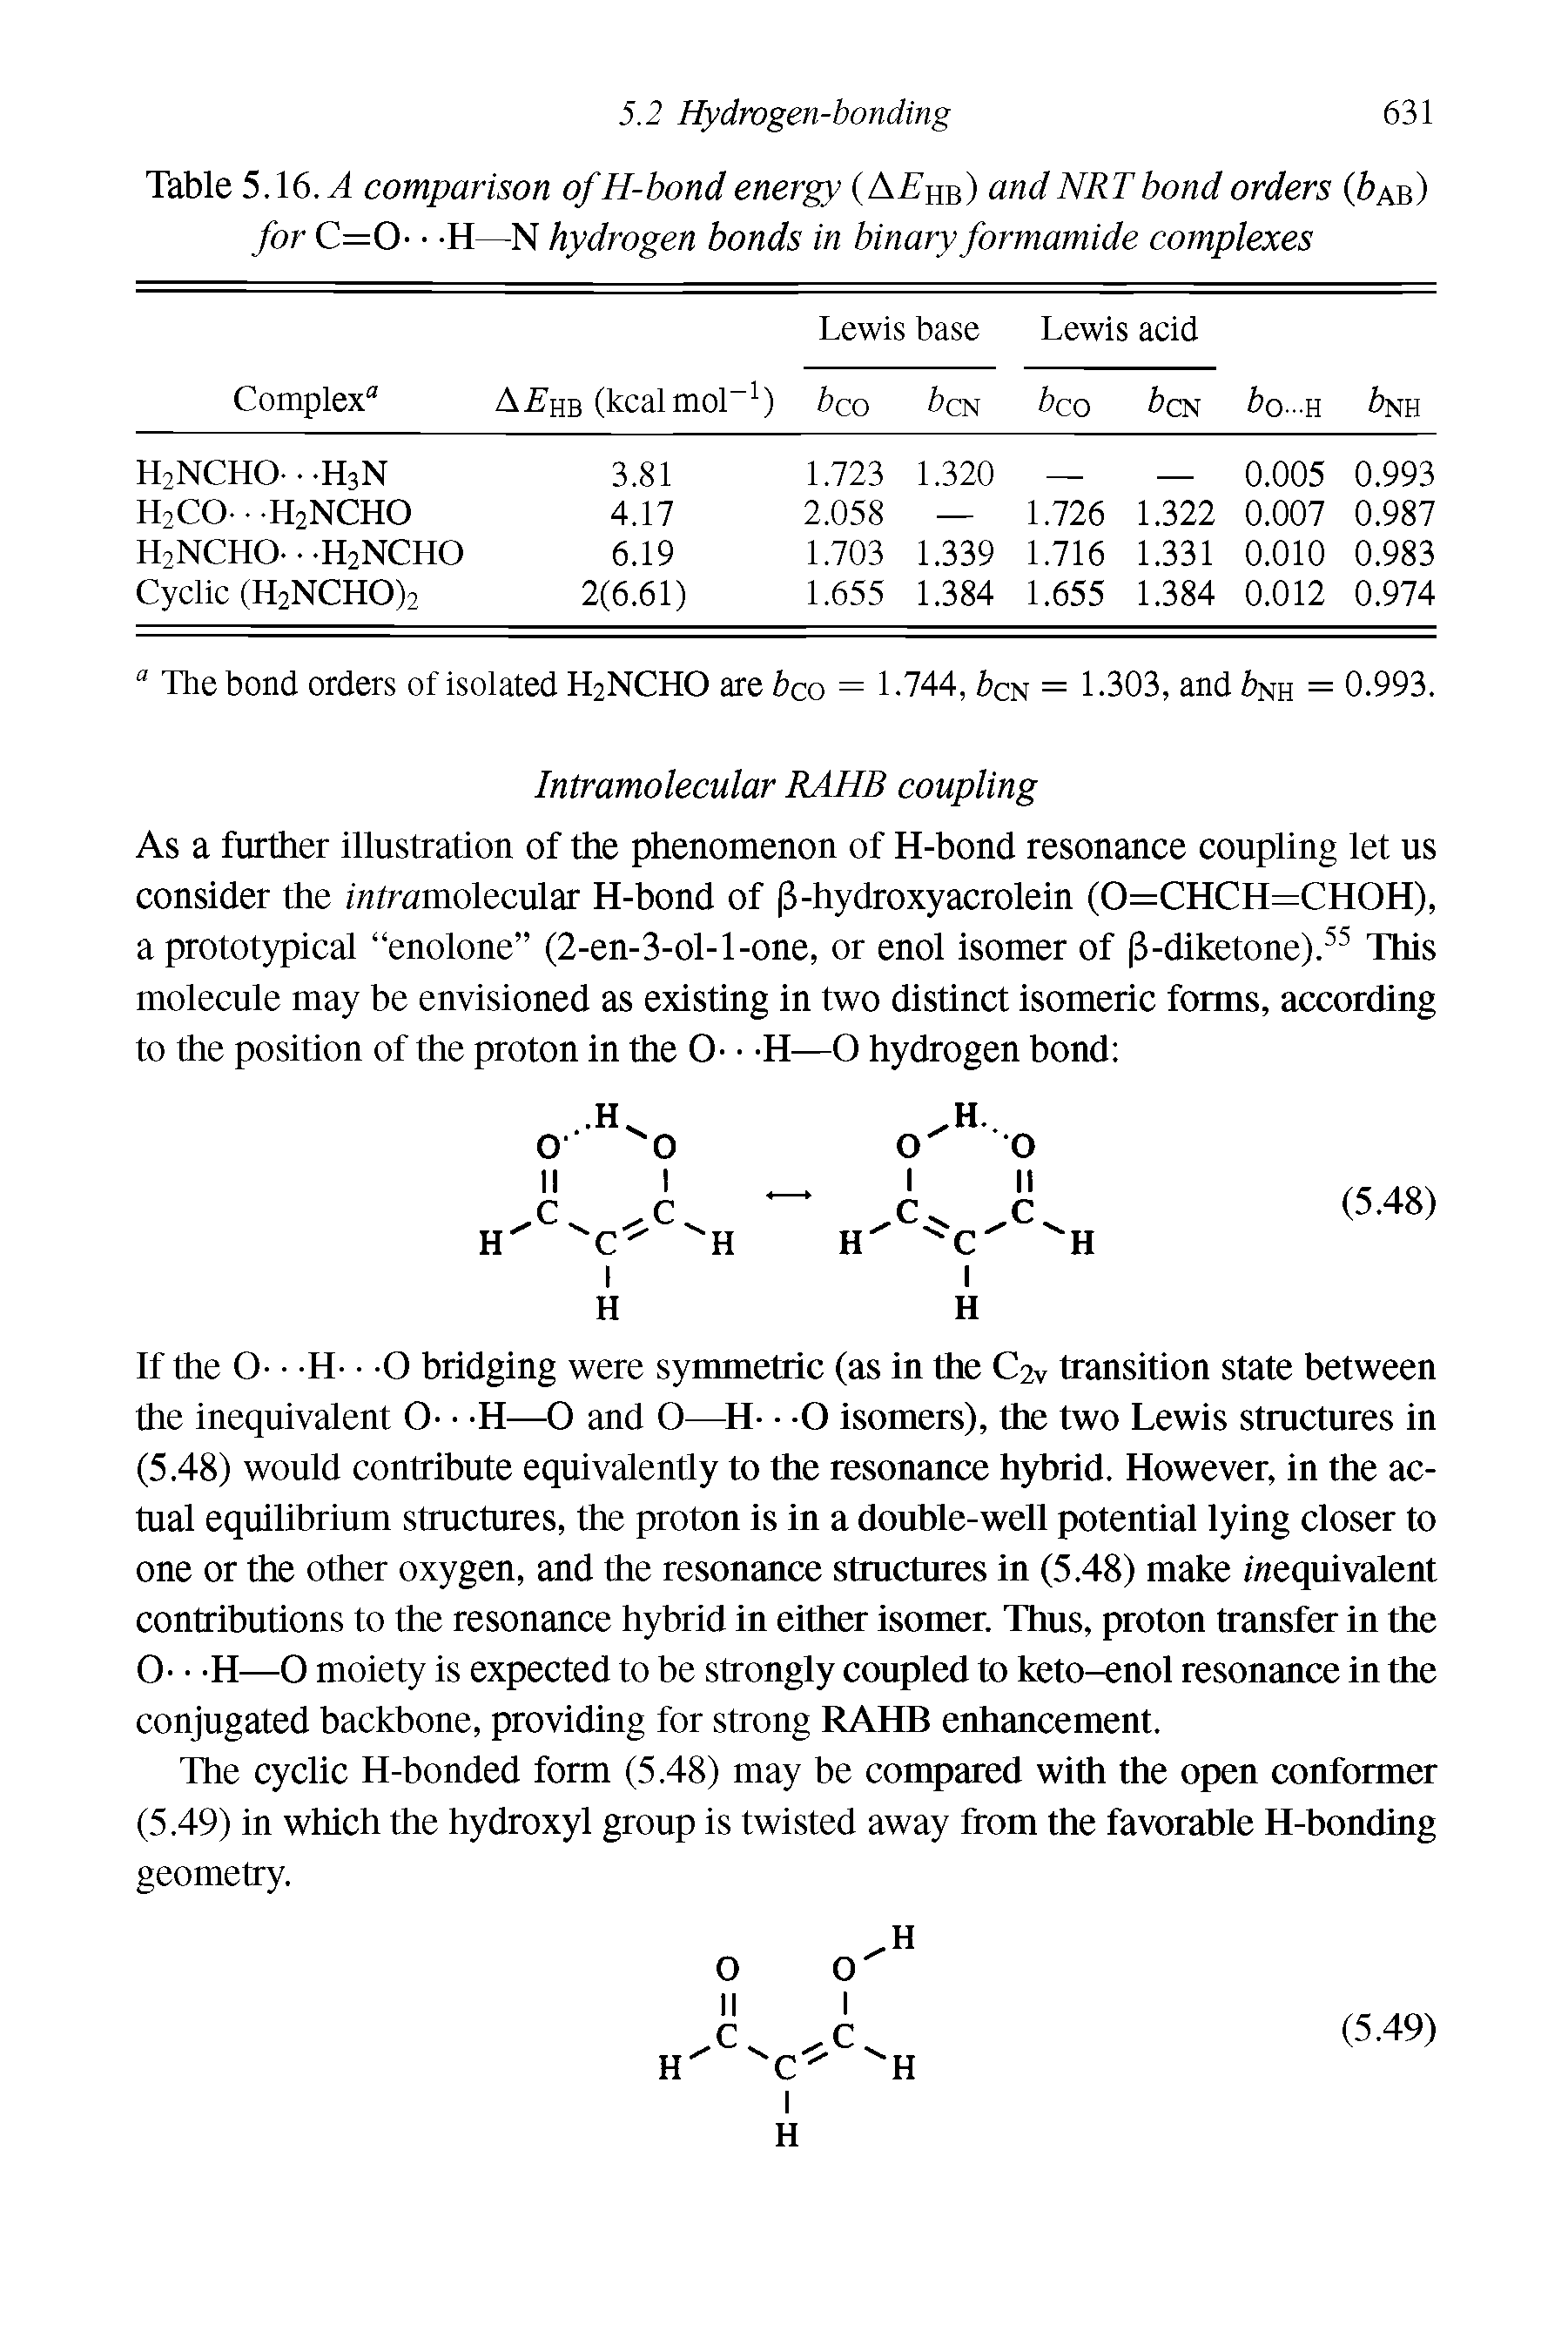 Table 5.16. A comparison ofH-bond energy (AAhb) andNRTbond orders ( ab) for C=0- H—N hydrogen bonds in binary formamide complexes...